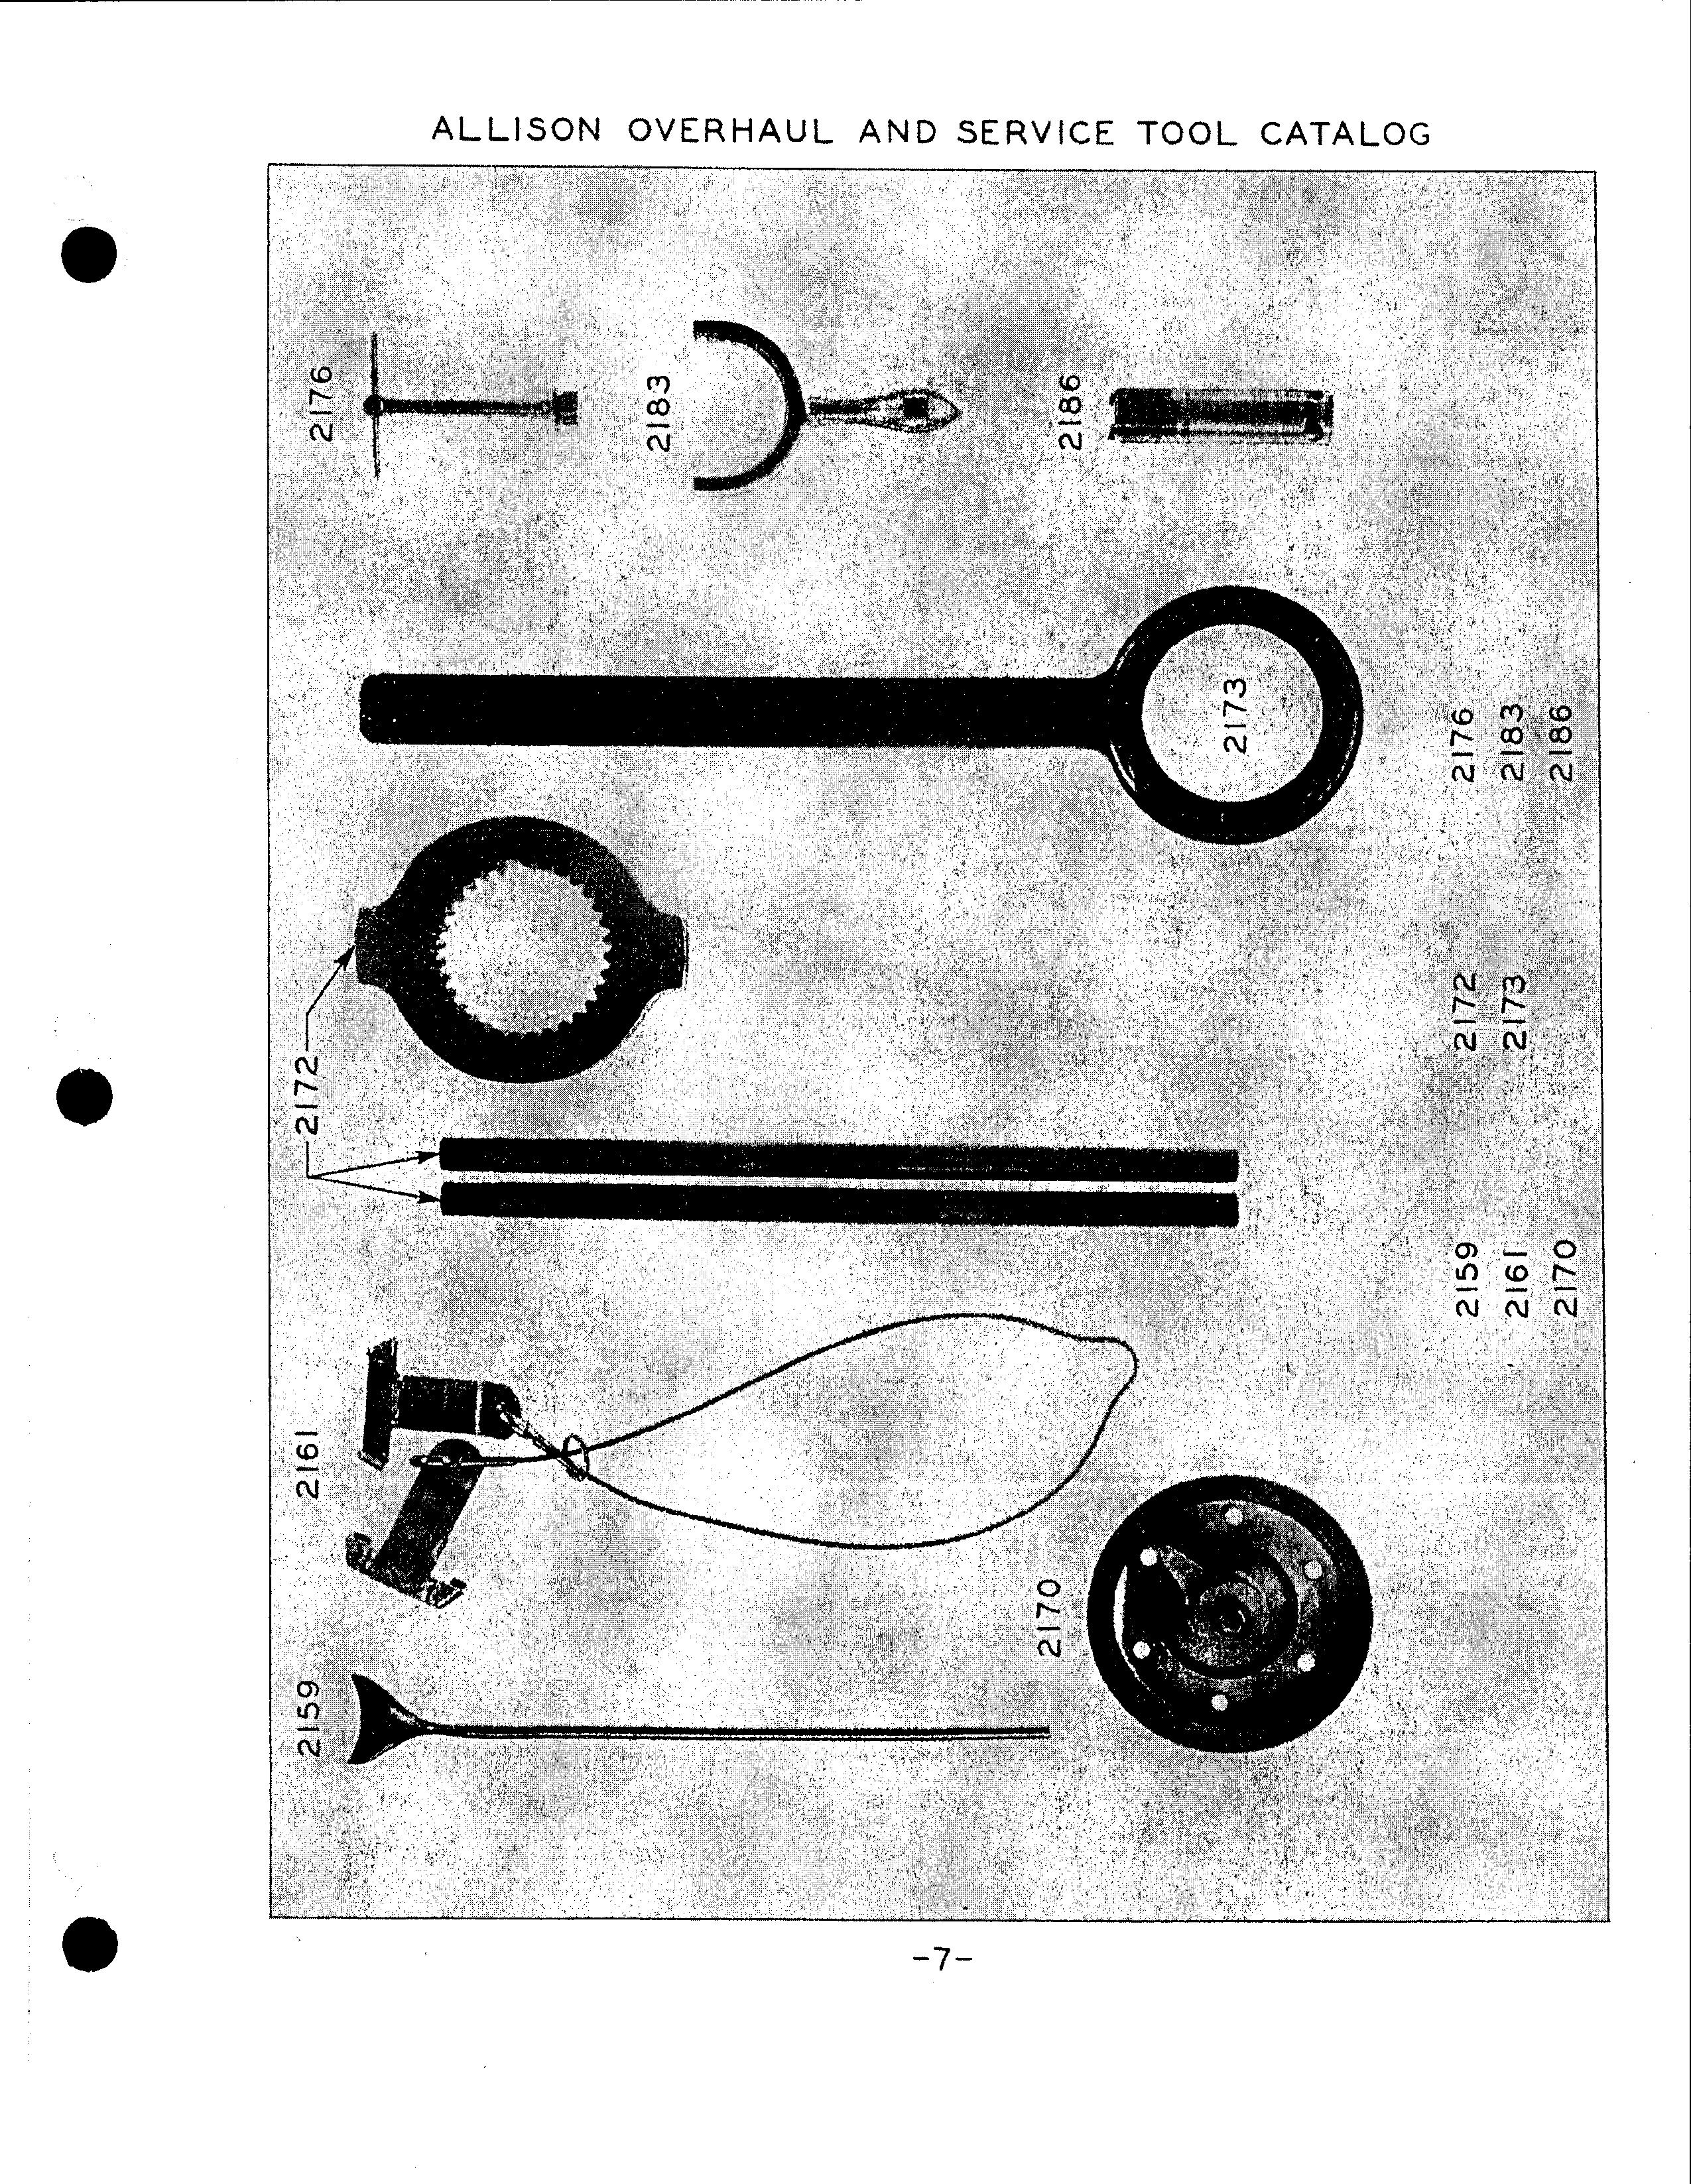 Sample page 9 from AirCorps Library document: Commercial Overhaul and Service Tool Catalog for Allison Engines